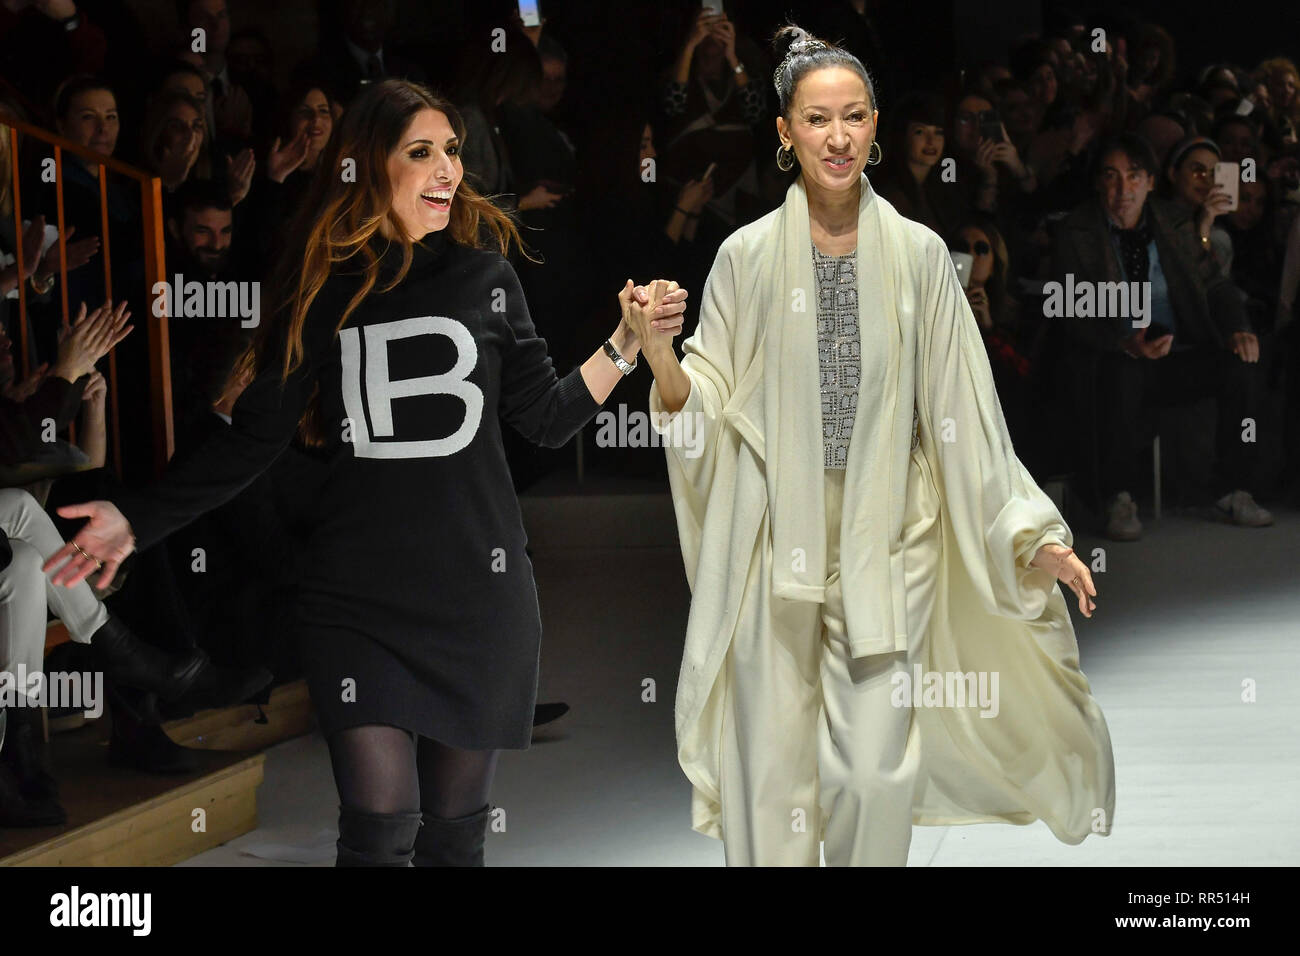 Milan, Italy. 24th Feb, 2019. 2020. Laura Biagiotti Fashion Show In Photo: Lavinia Biagiotti Pat Cleveland Credit: Independent Photo Agency/Alamy Live News Stock Photo